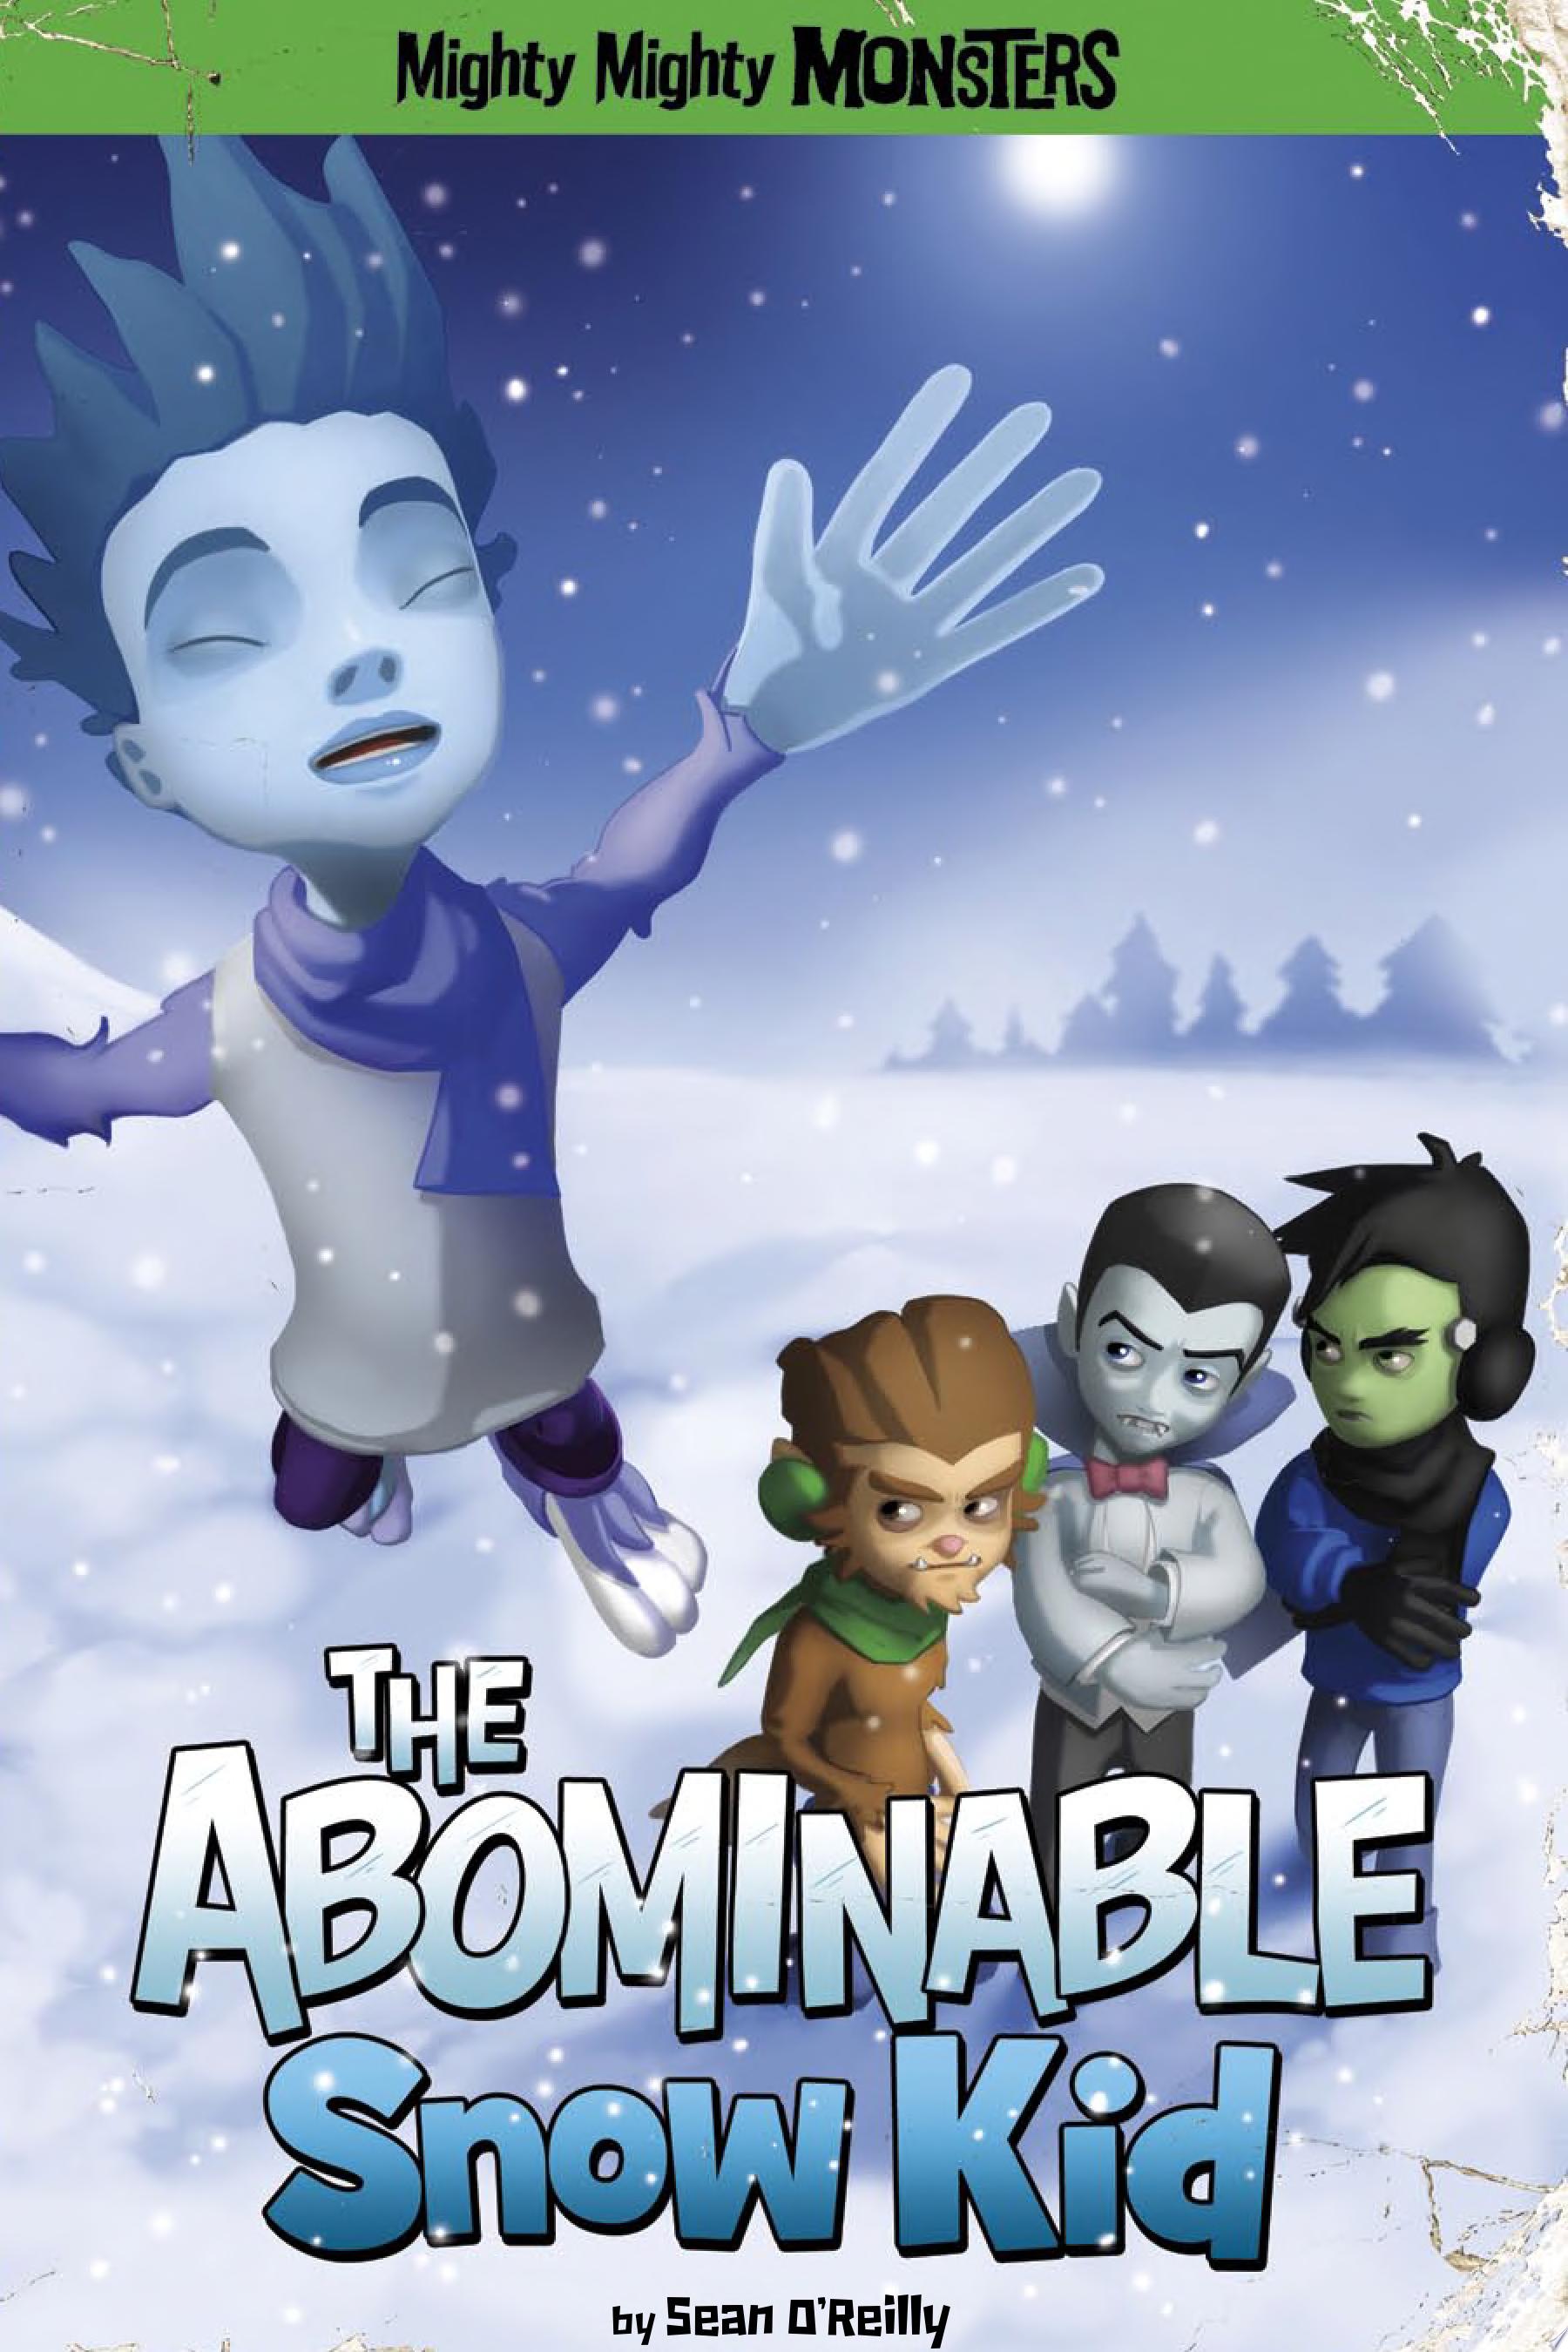 Image for "The Abominable Snow Kid"